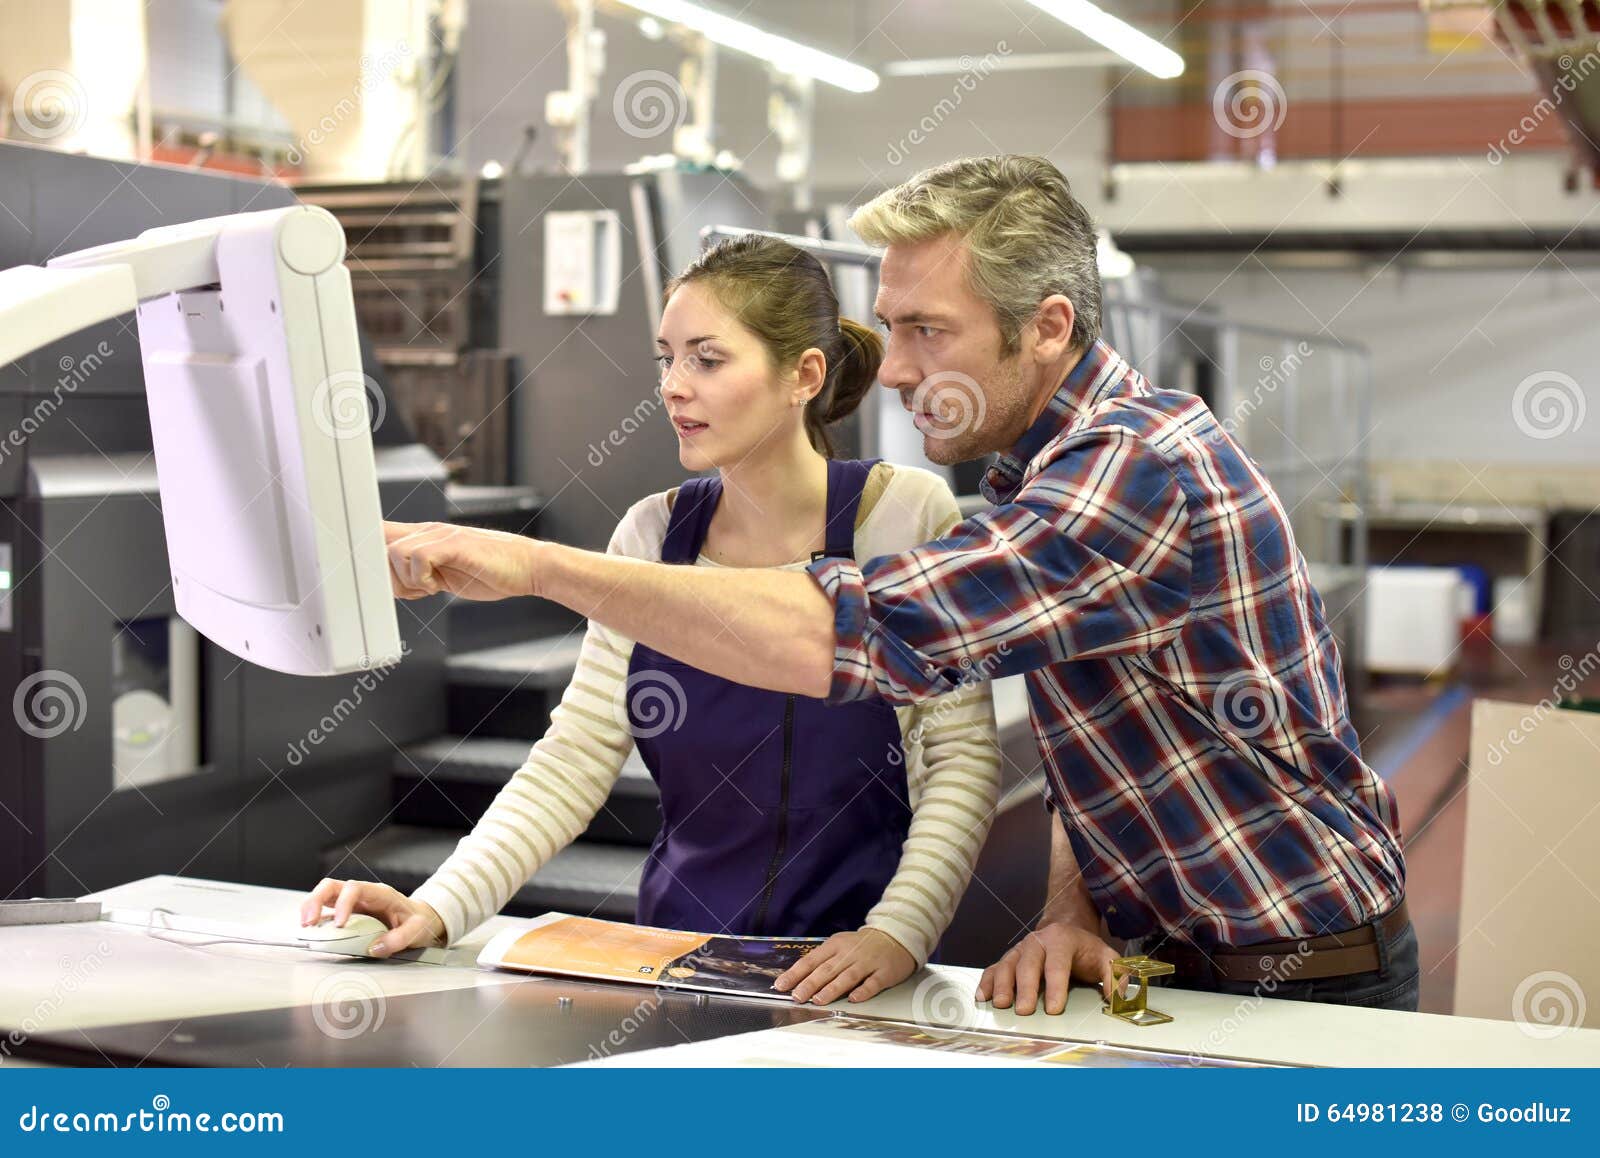 Professional Printer Working With Apprentice Stock Photo 